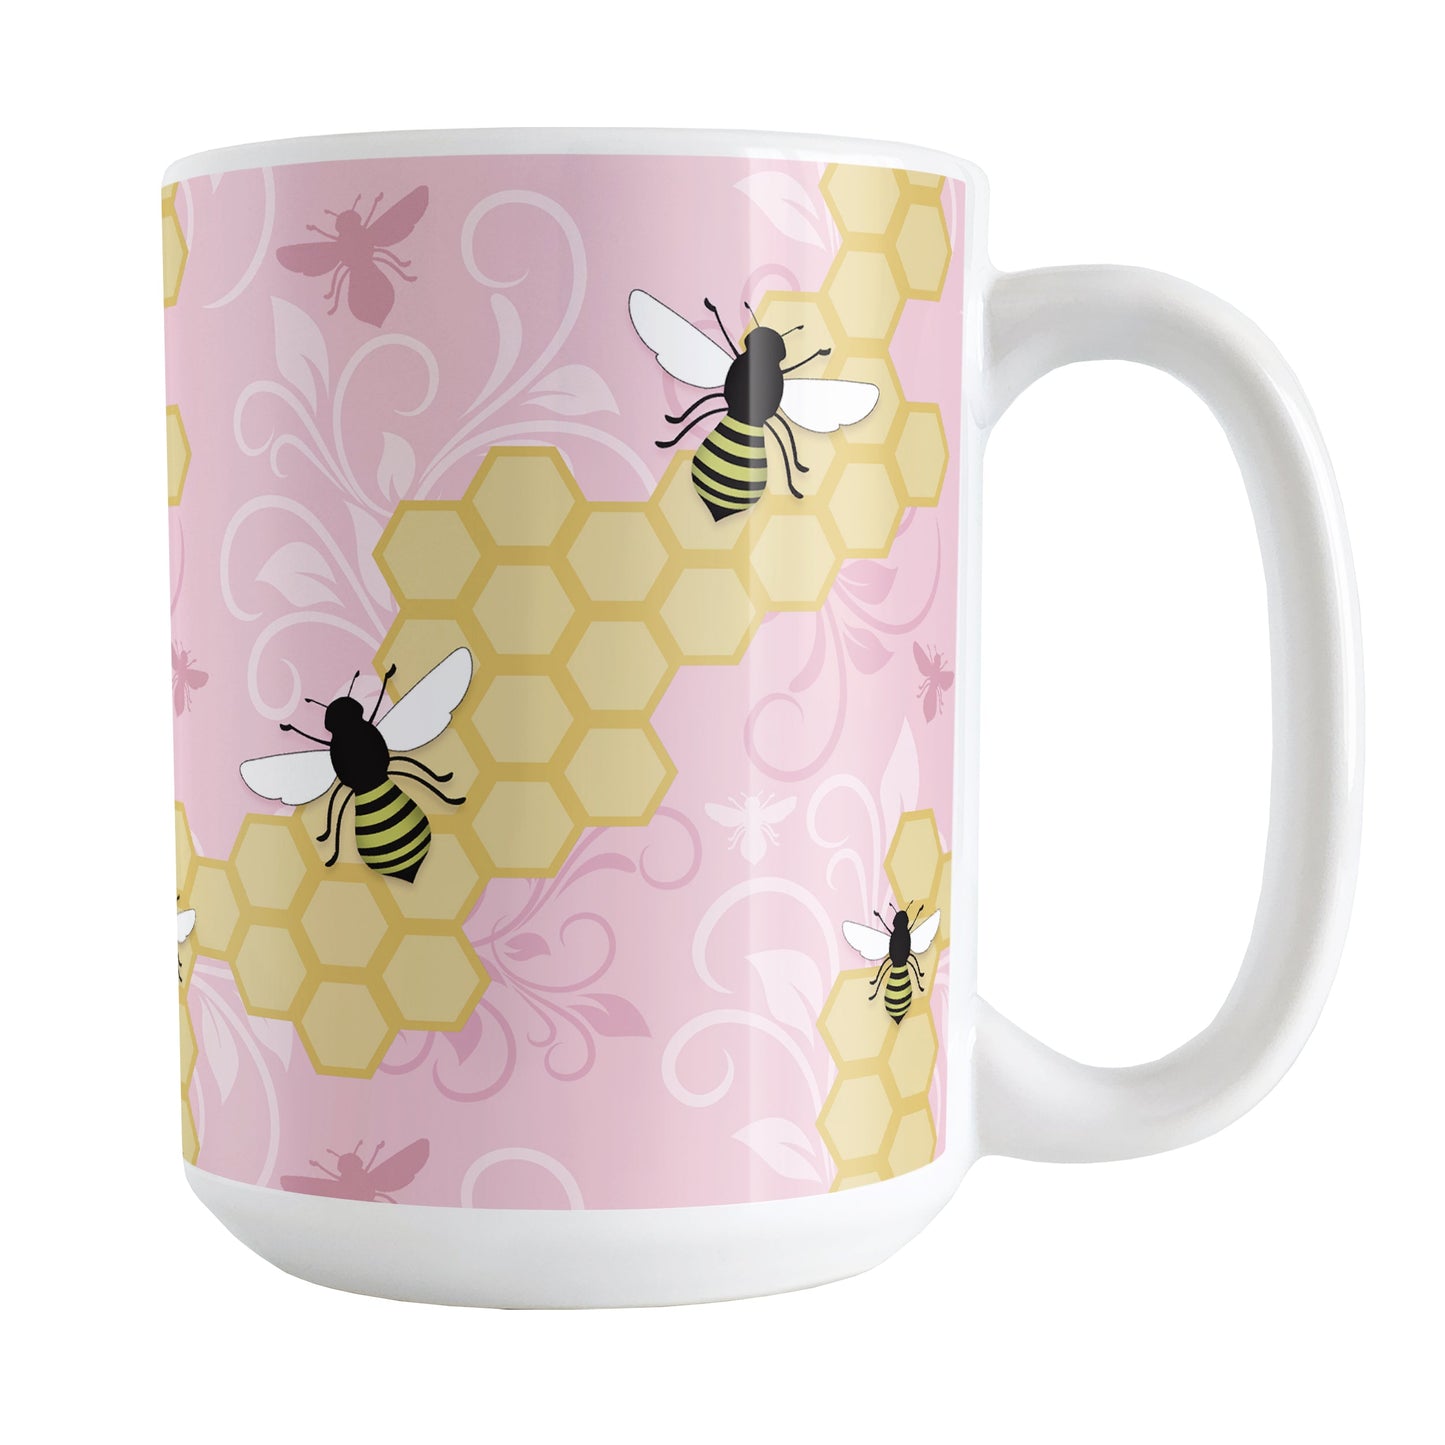 Pink Honeycomb Bee Mug (15oz) at Amy's Coffee Mugs. A ceramic coffee mug designed with a pattern of black and yellow bees on honeycomb lines over a pink flourish background that wraps around the mug to the handle.